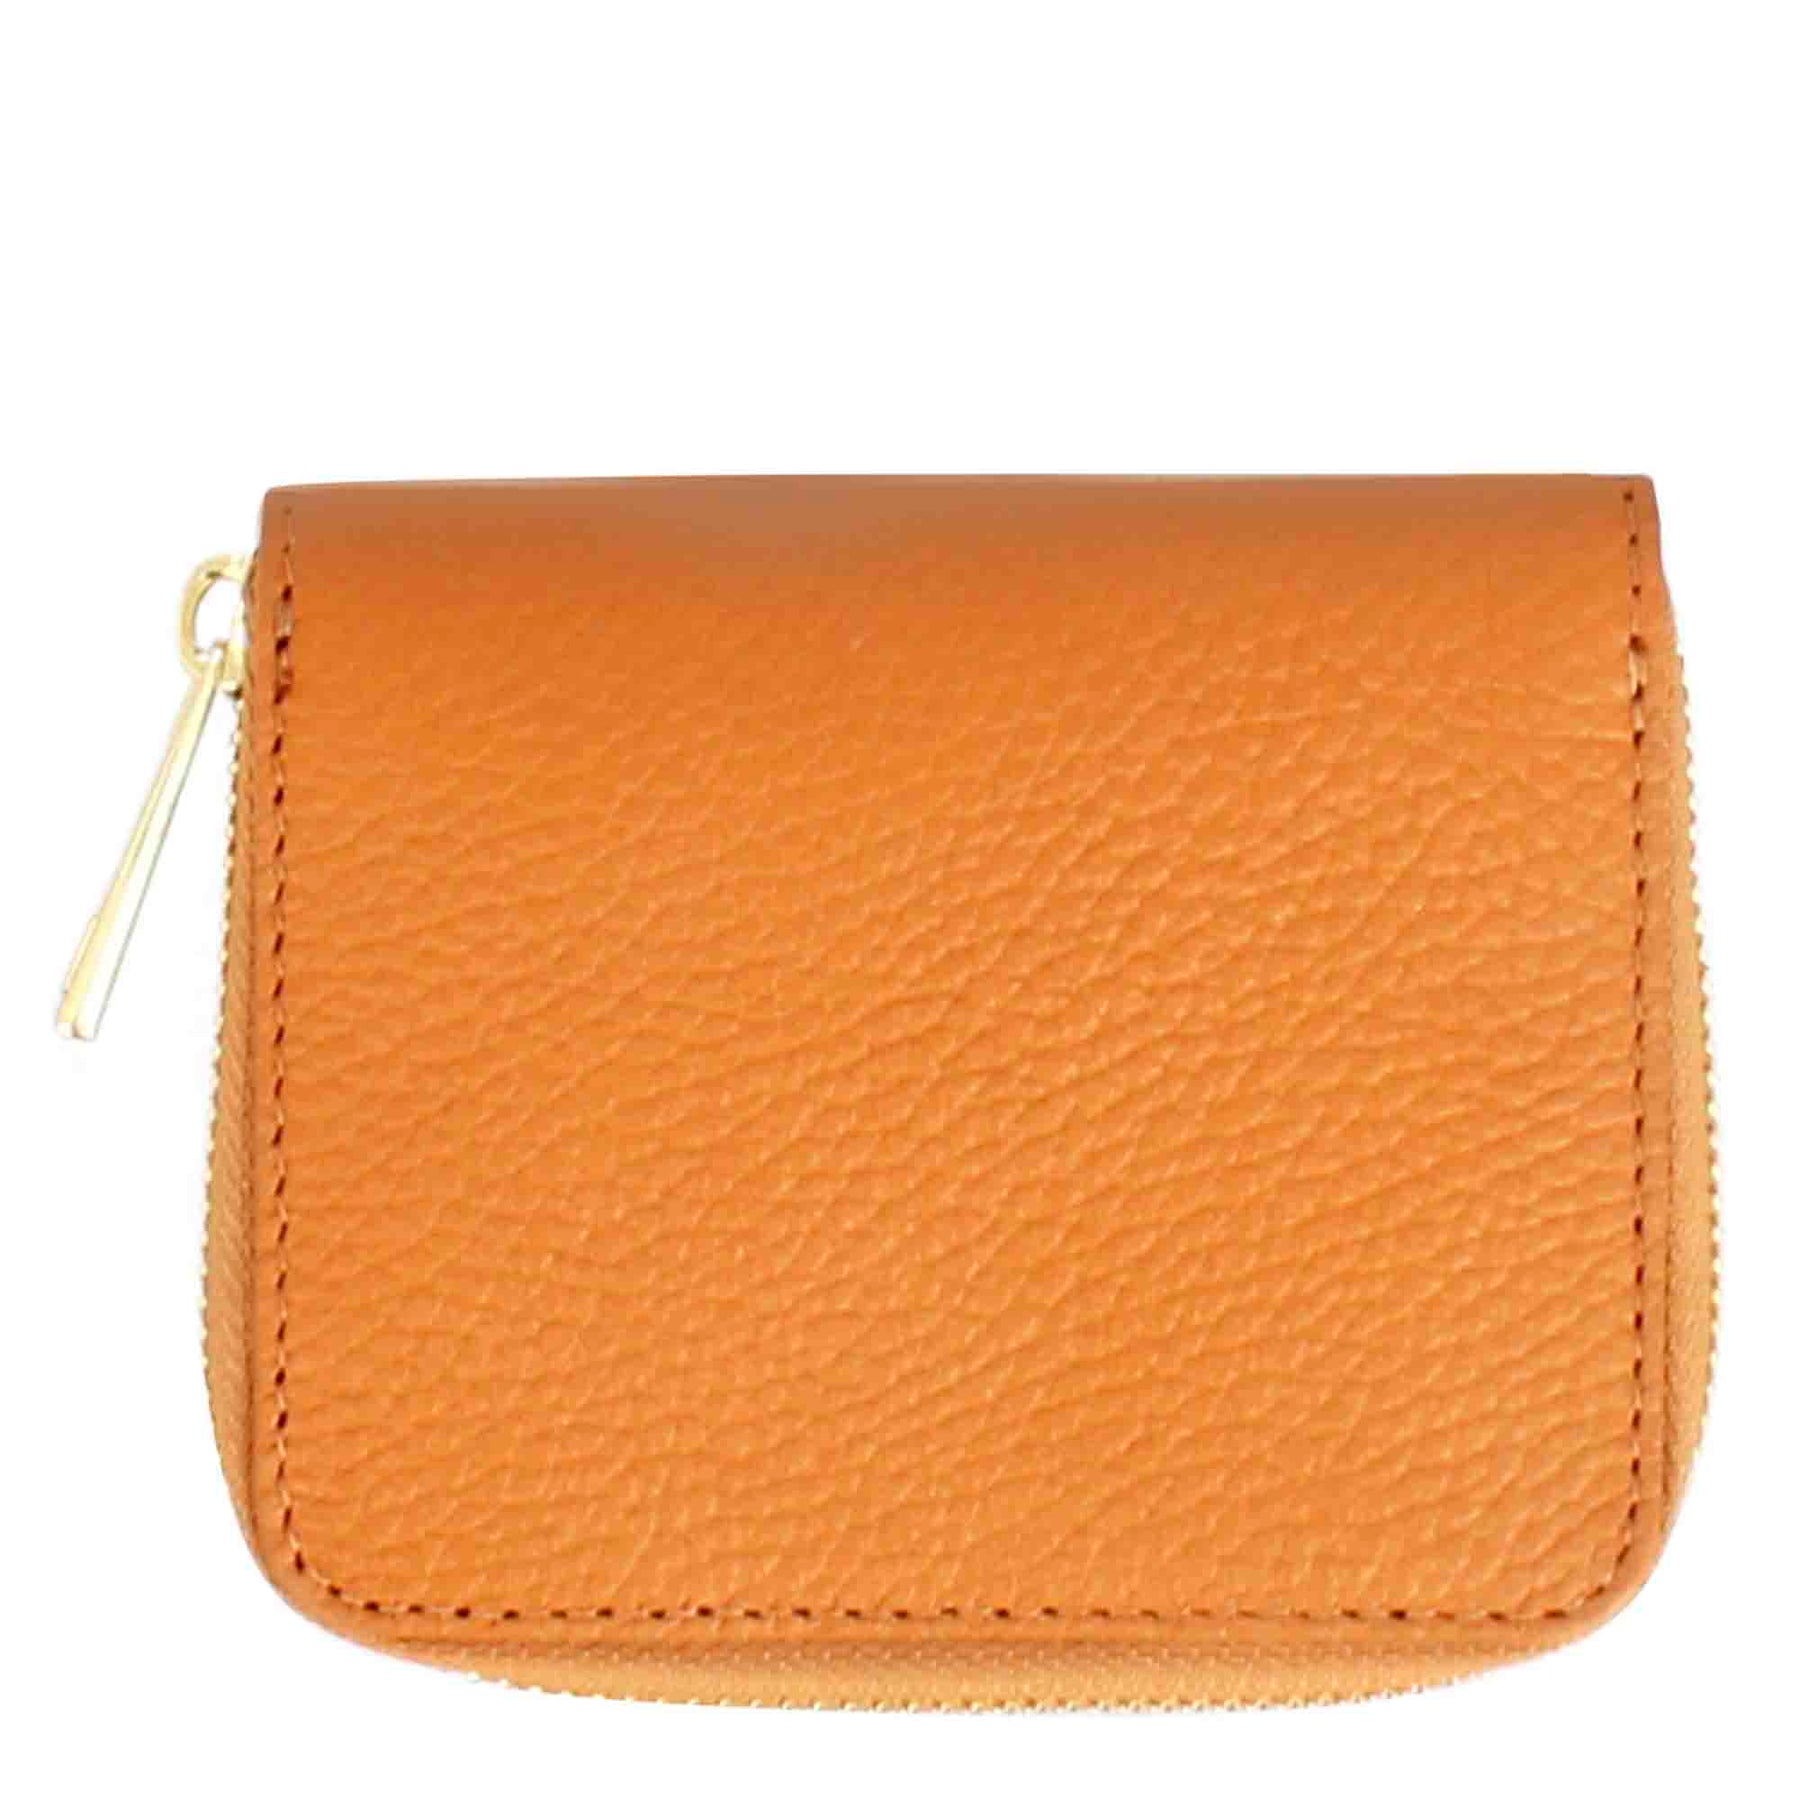 Small women's leather wallet with zip